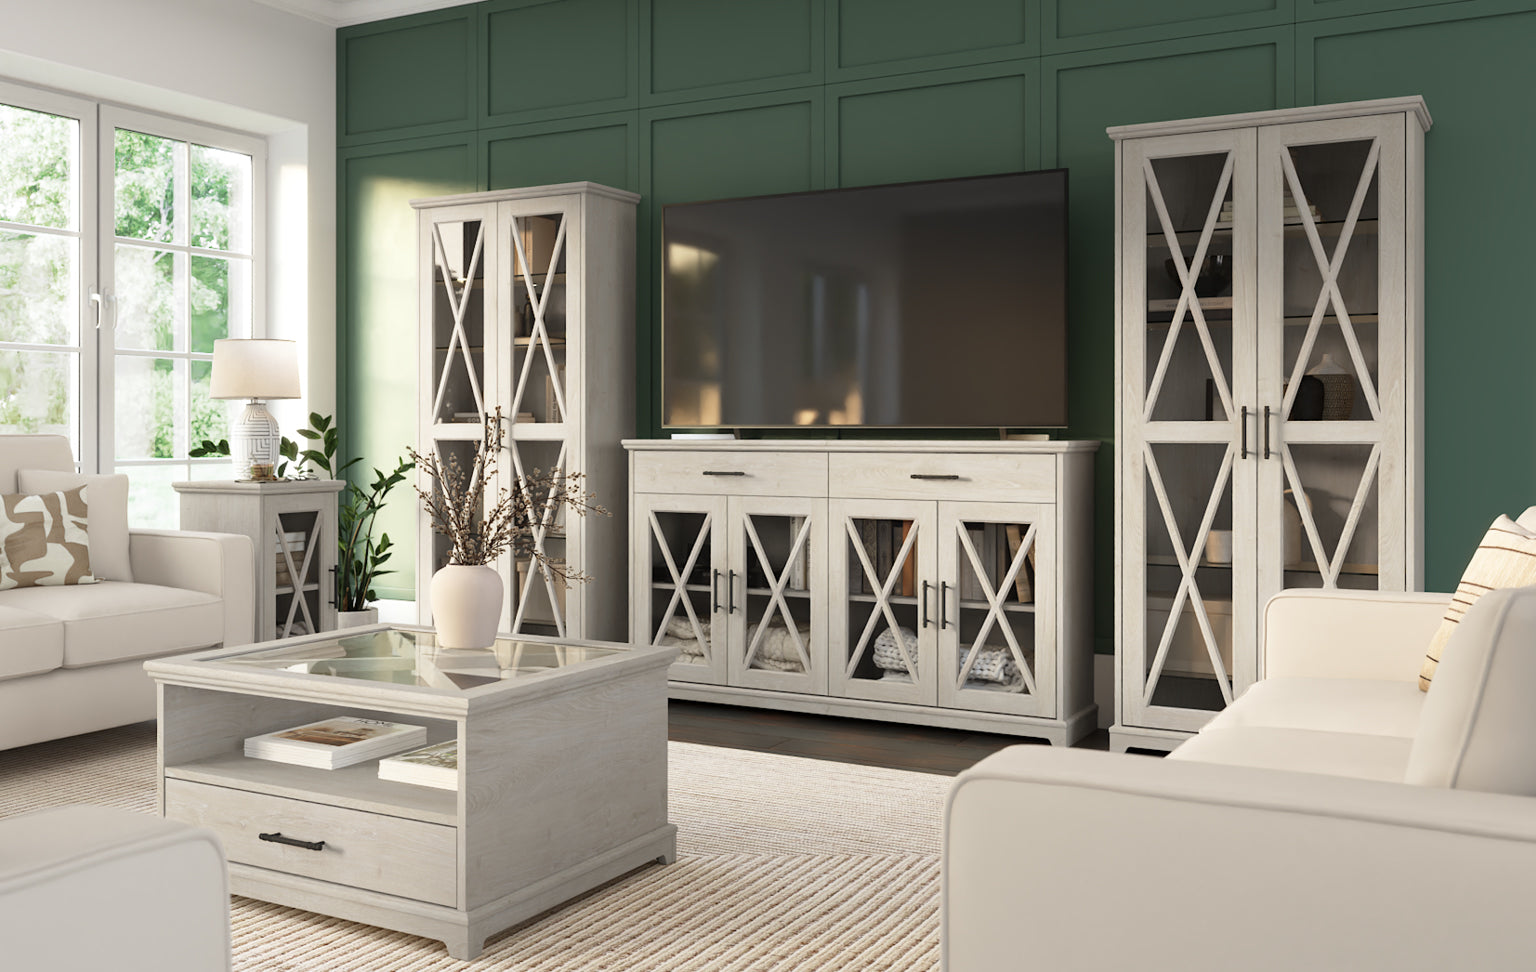 6 TV Stand Tips for a Beautiful Living Room